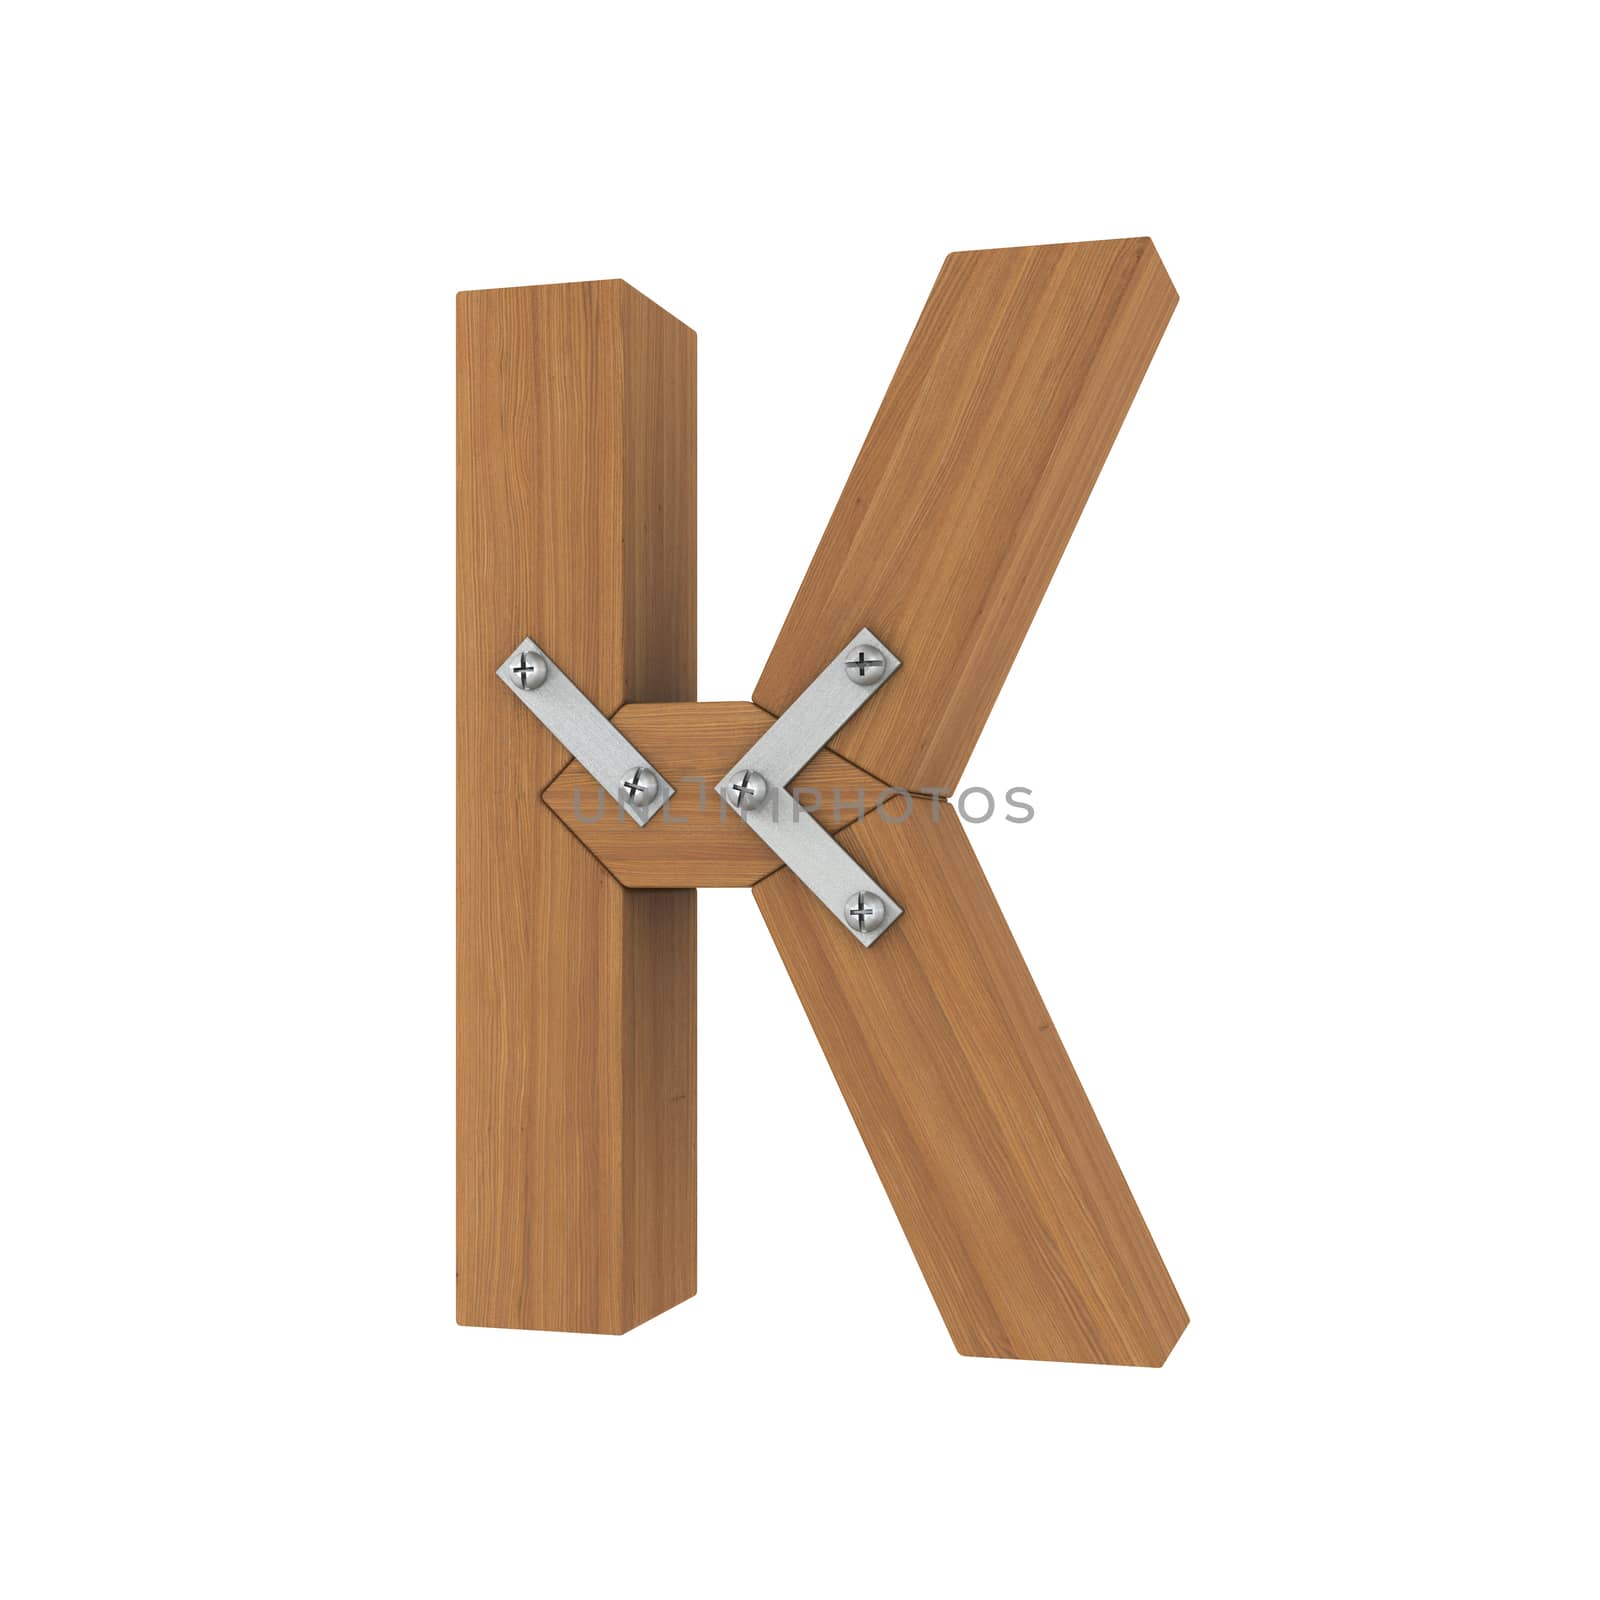 Wooden letter K. Isolated render on a white background